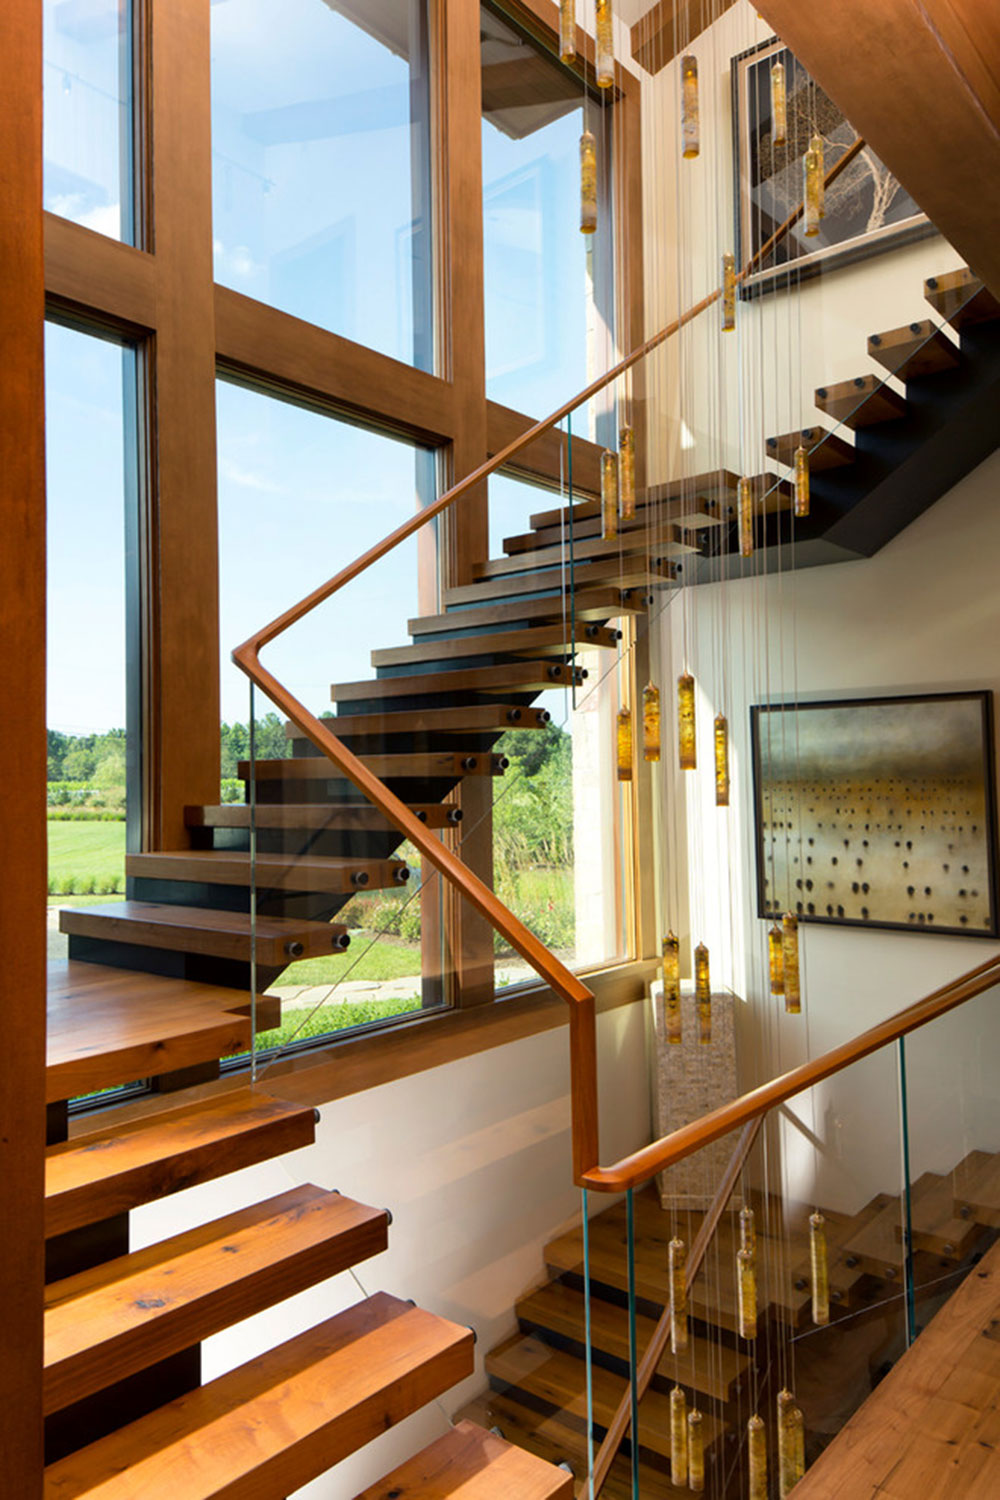 Modern-And-Exquisite-Floating-Staircase4 Modern And Exquisite Floating Staircase Designs